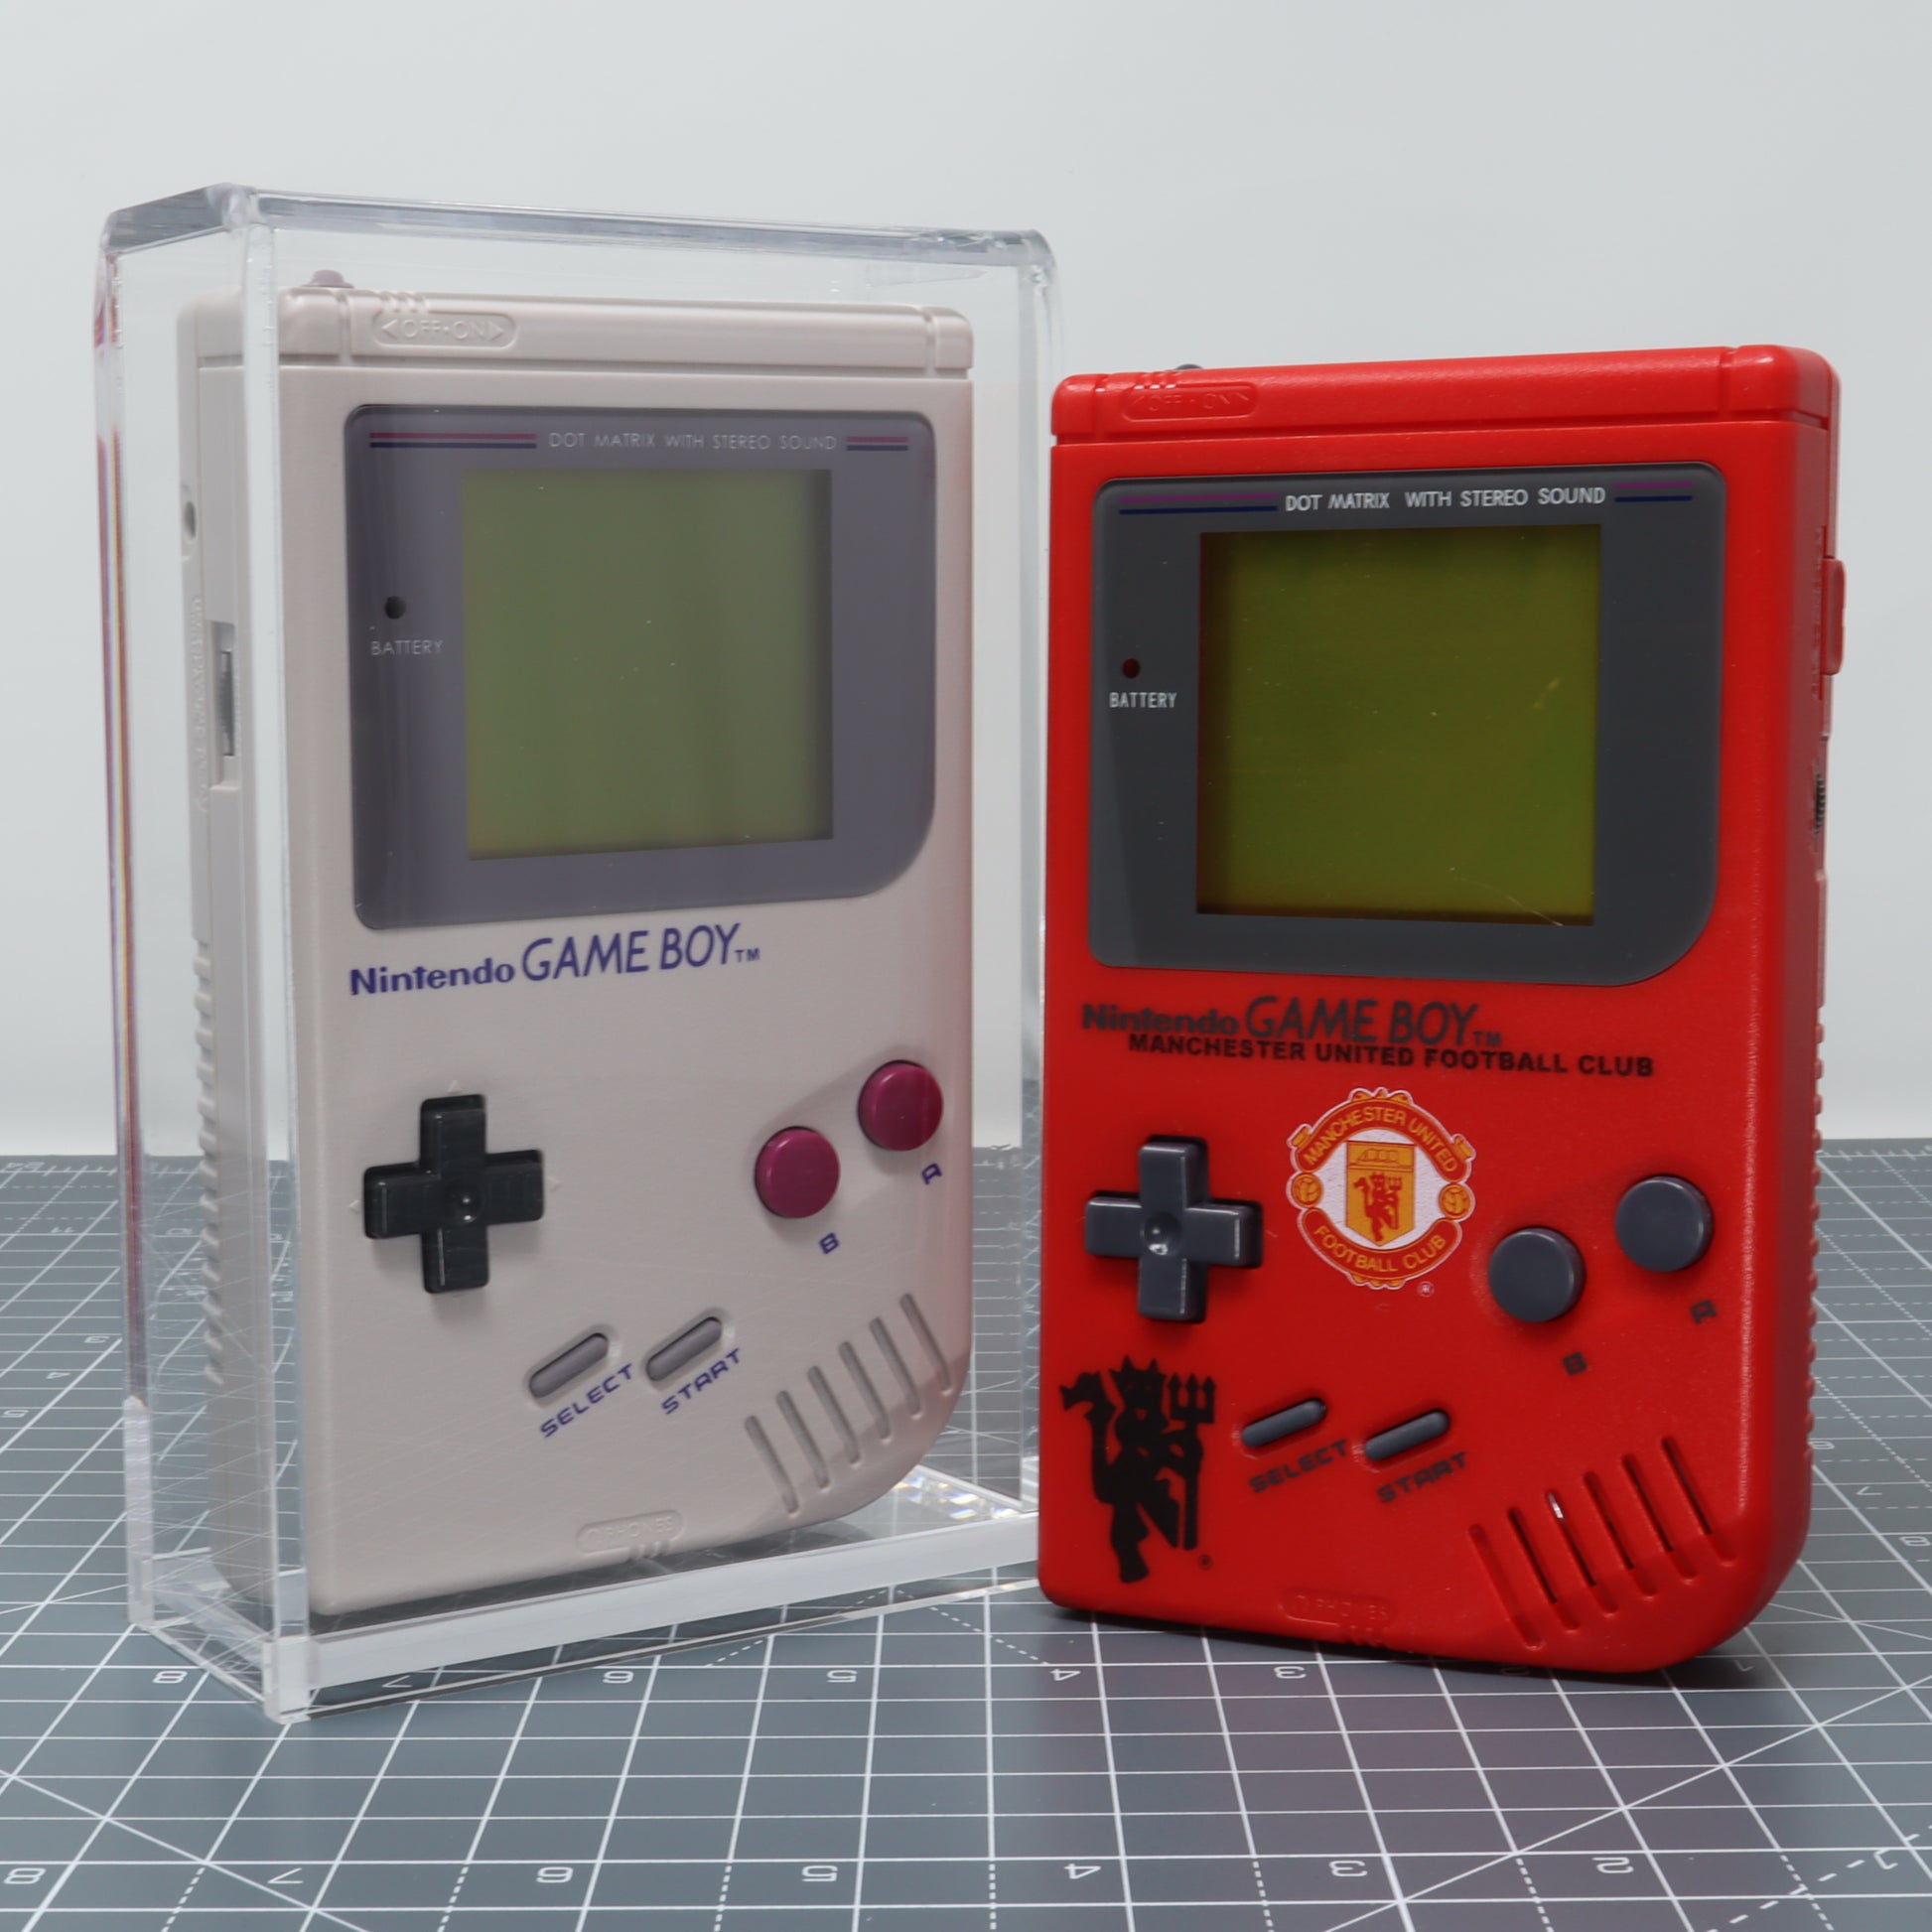 Two Game Boy DMG handheld consoles, one transparent and the other in Manchester United football club colors, are displayed side by side in acrylic display capsules.